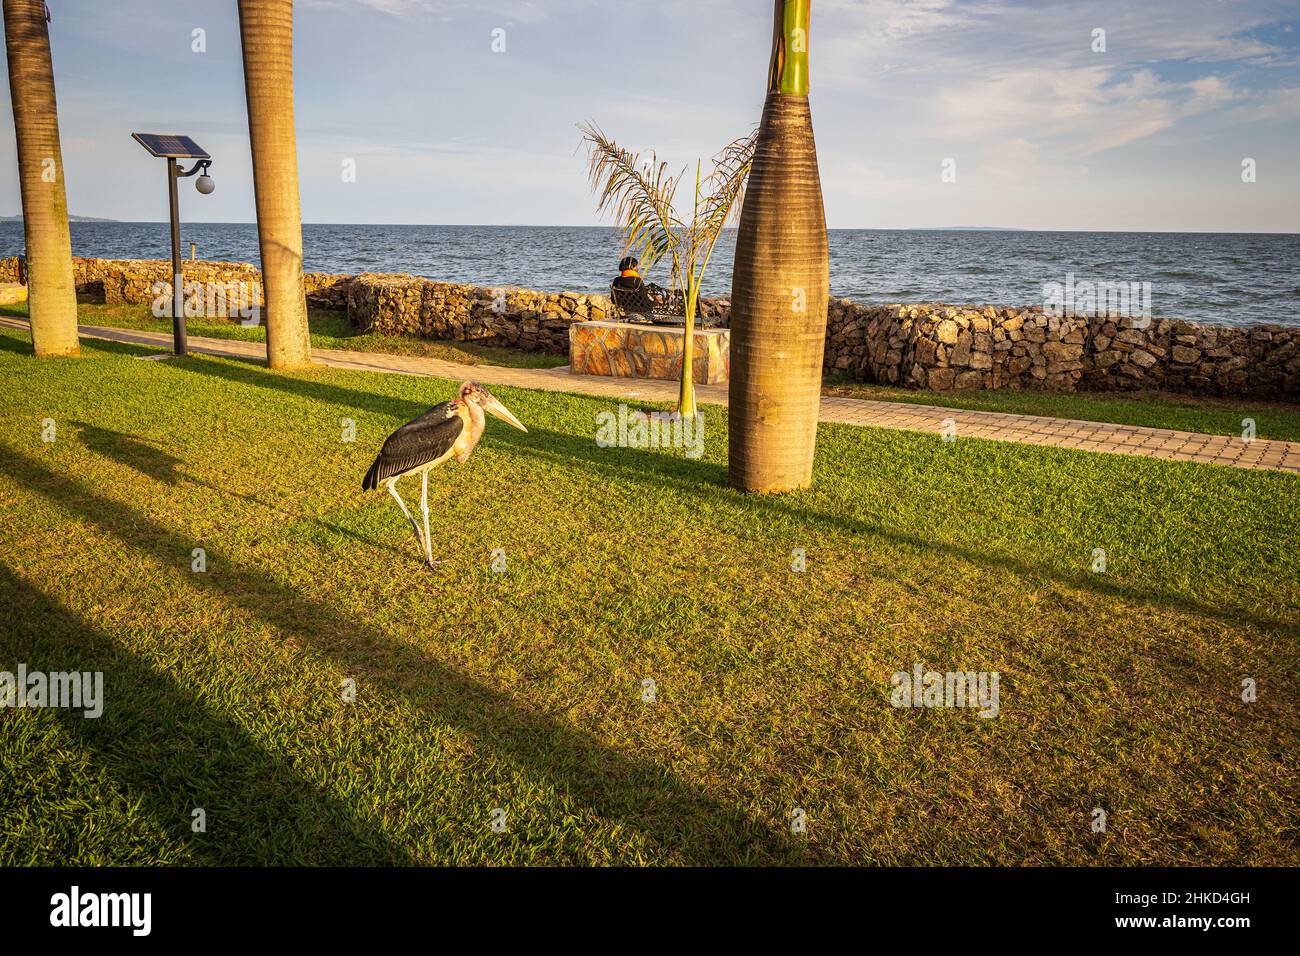 View of a marabou stalking between palm trees across a park on the shores of Lake Victoria, Entebbe, Uganda Stock Photo